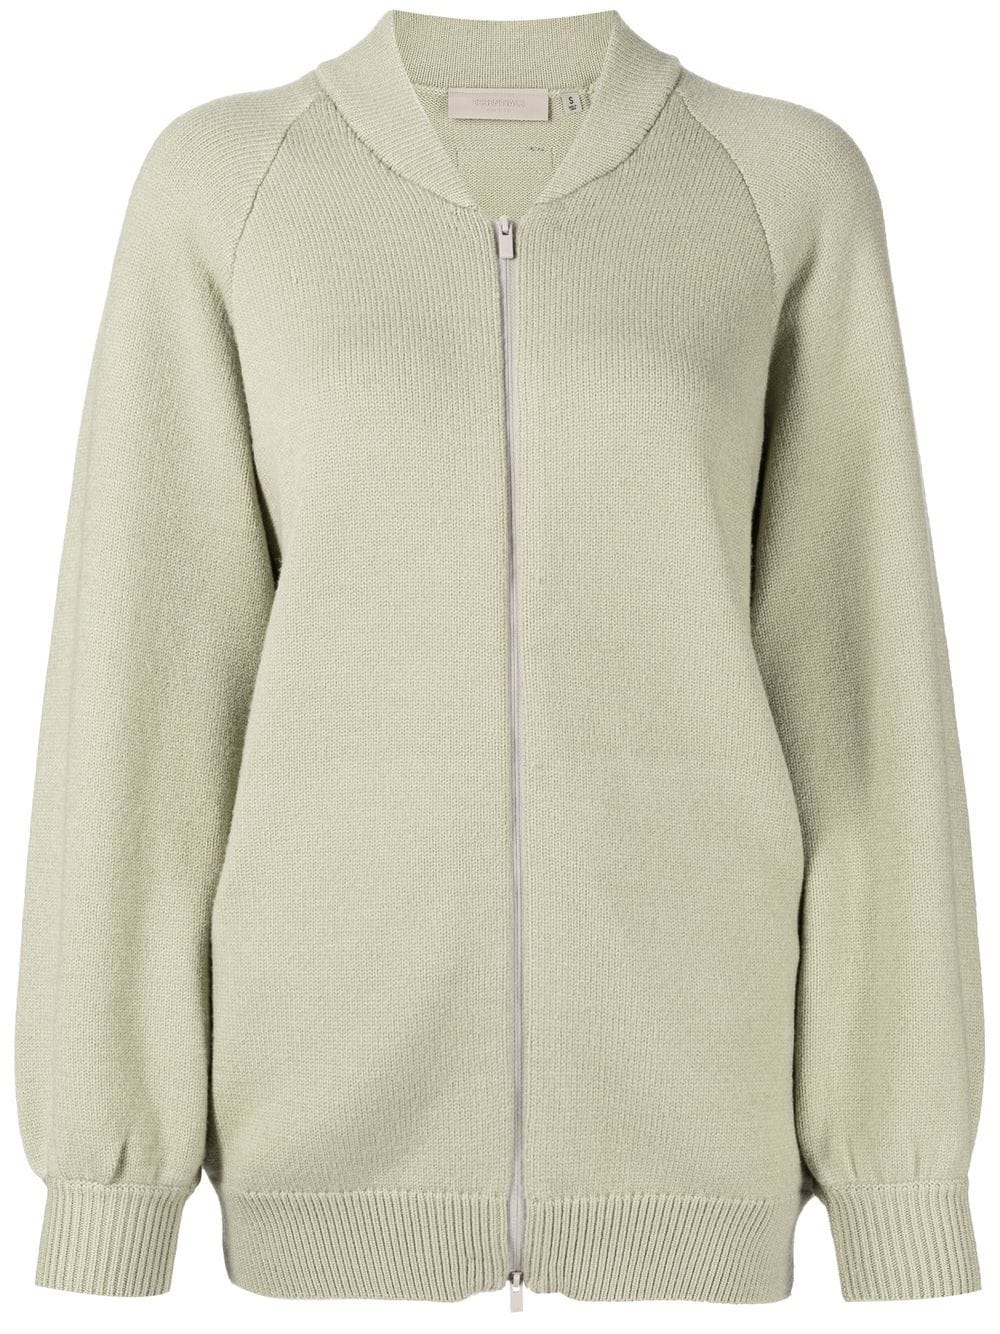 FEAR OF GOD ESSENTIALS zip-up Knitted Jacket - Farfetch